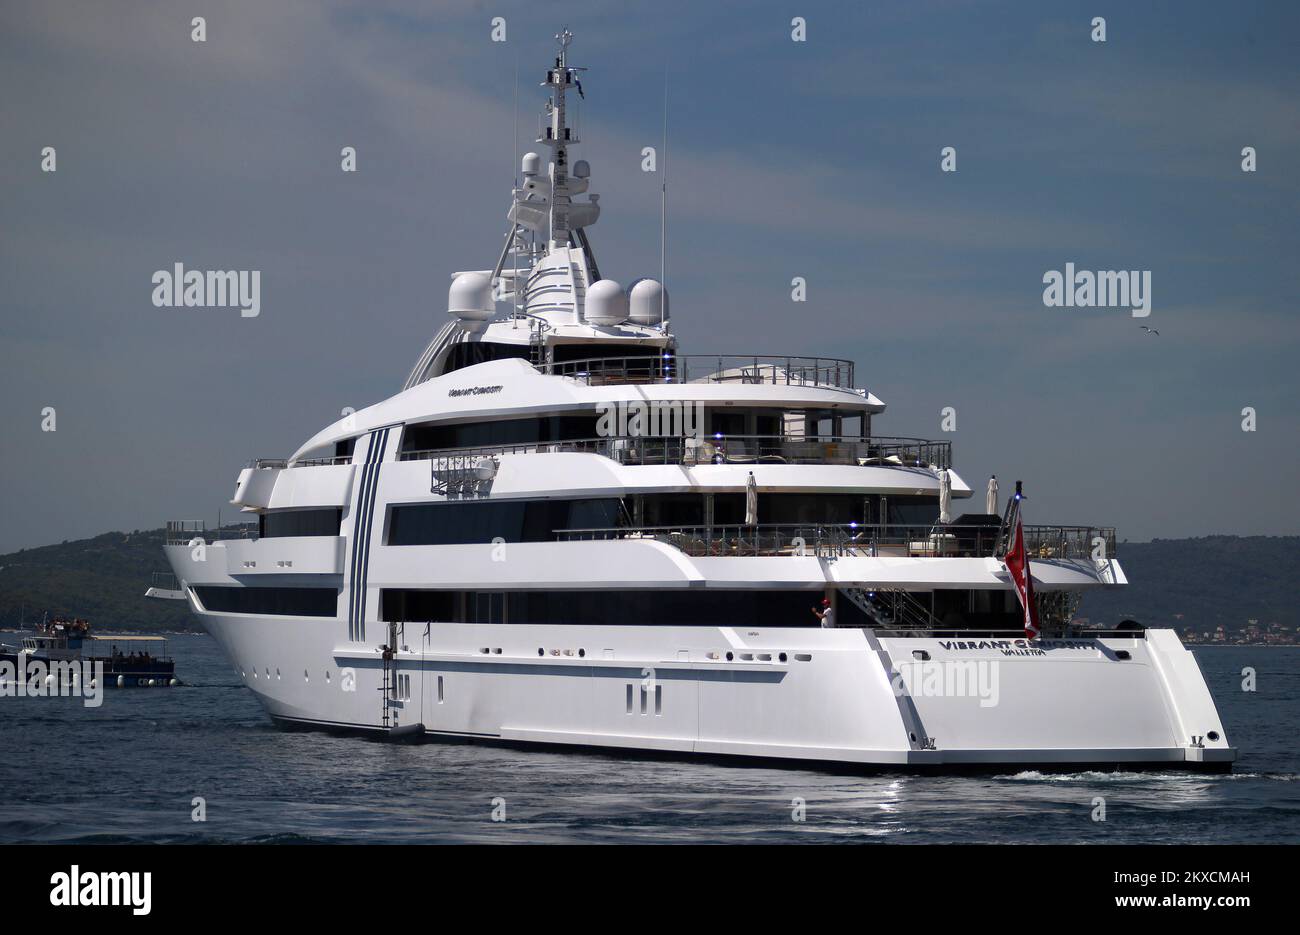 17.08.2019., Split, Croatia - On the picture is seen yacht Vibrant Curiosity departing from the port of Split. The owner of the yacht is german billionaire Reinhold Wurth. Photo: Ivo Cagalj/PIKSELL Stock Photo